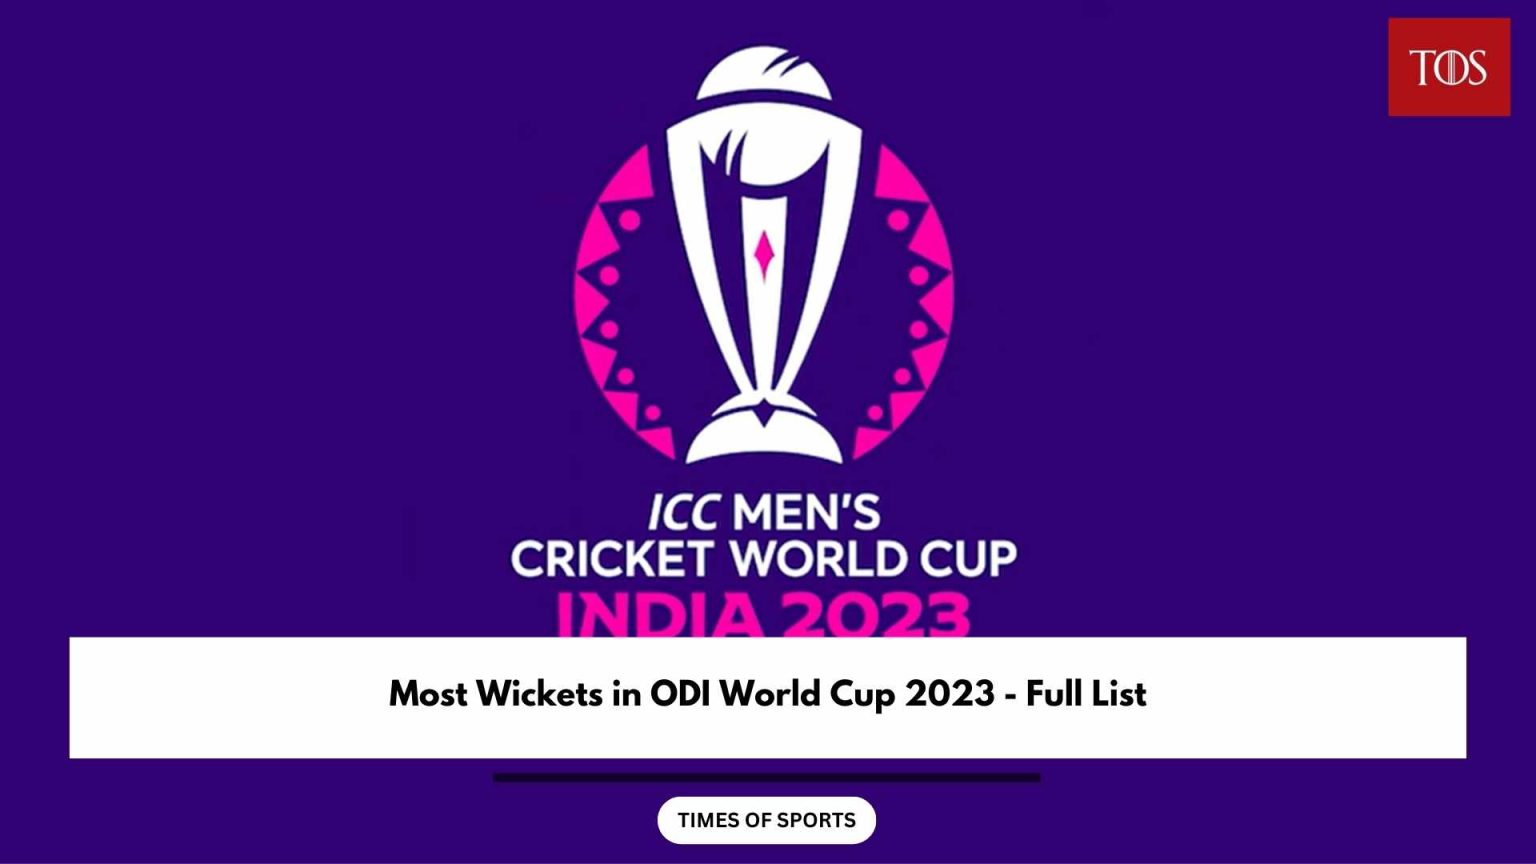 Most Wickets in ODI World Cup 2023 Highest Wicket Taker